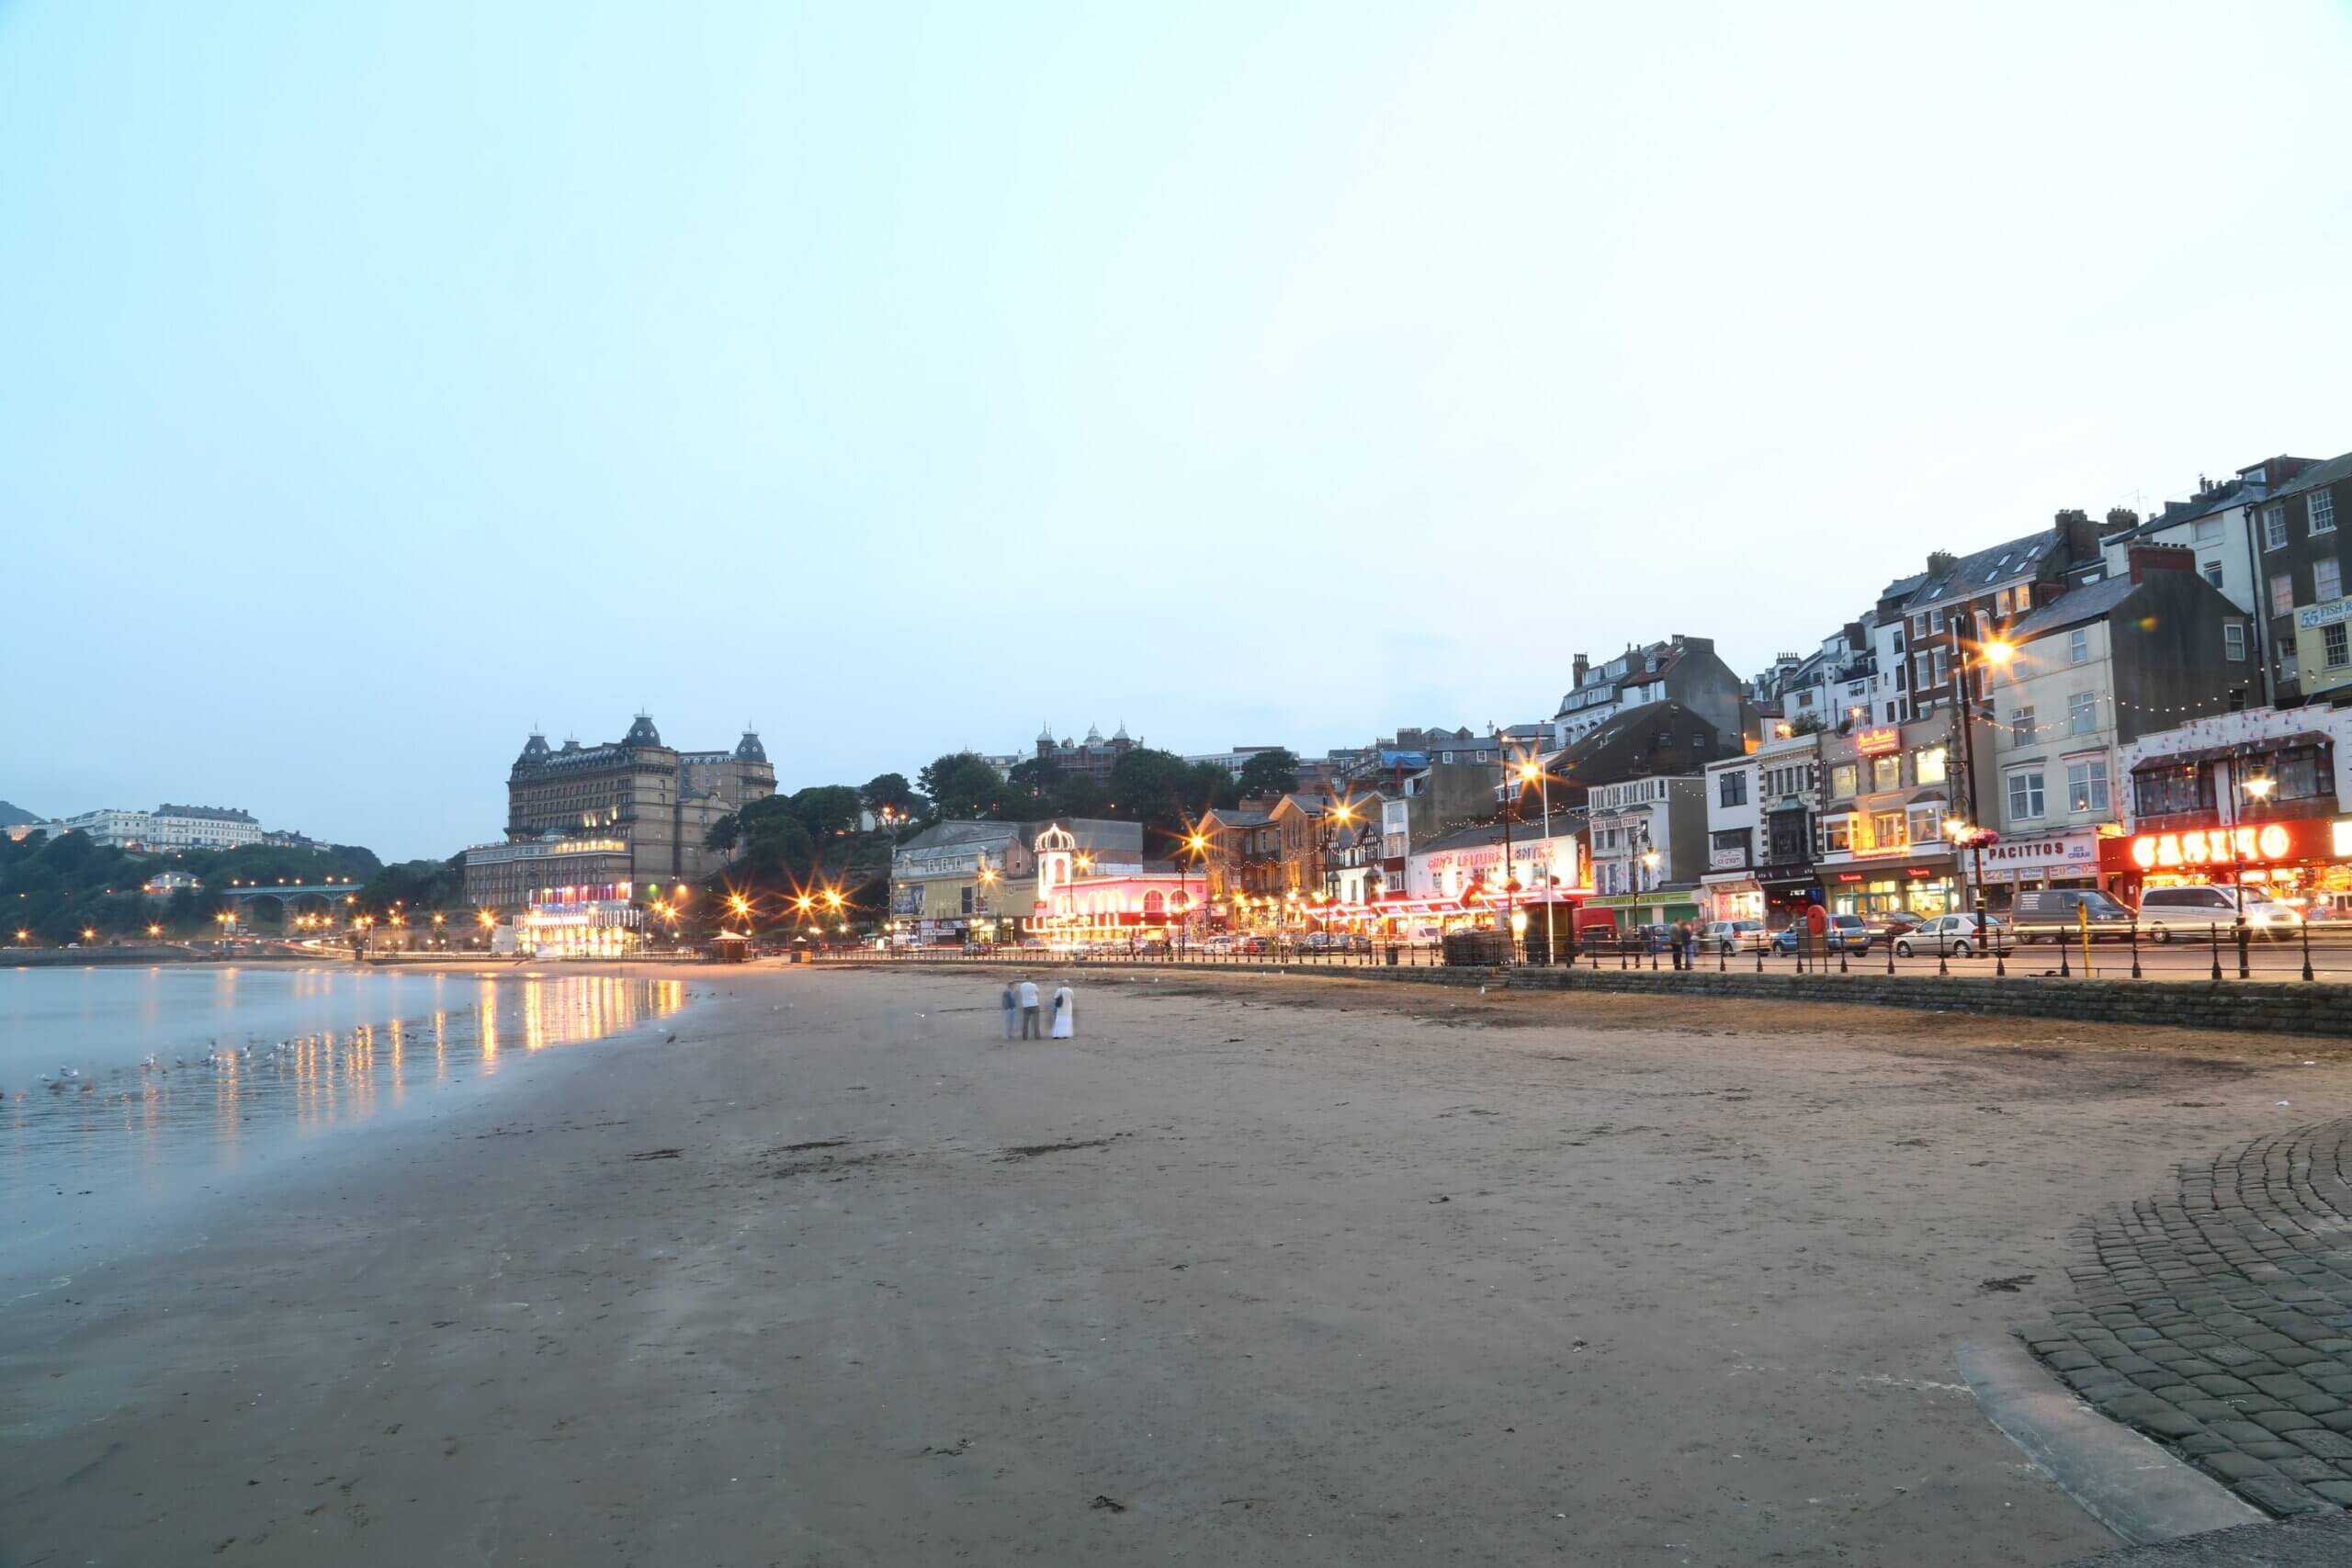 Best Caravan Parks near Scarborough and Whitby